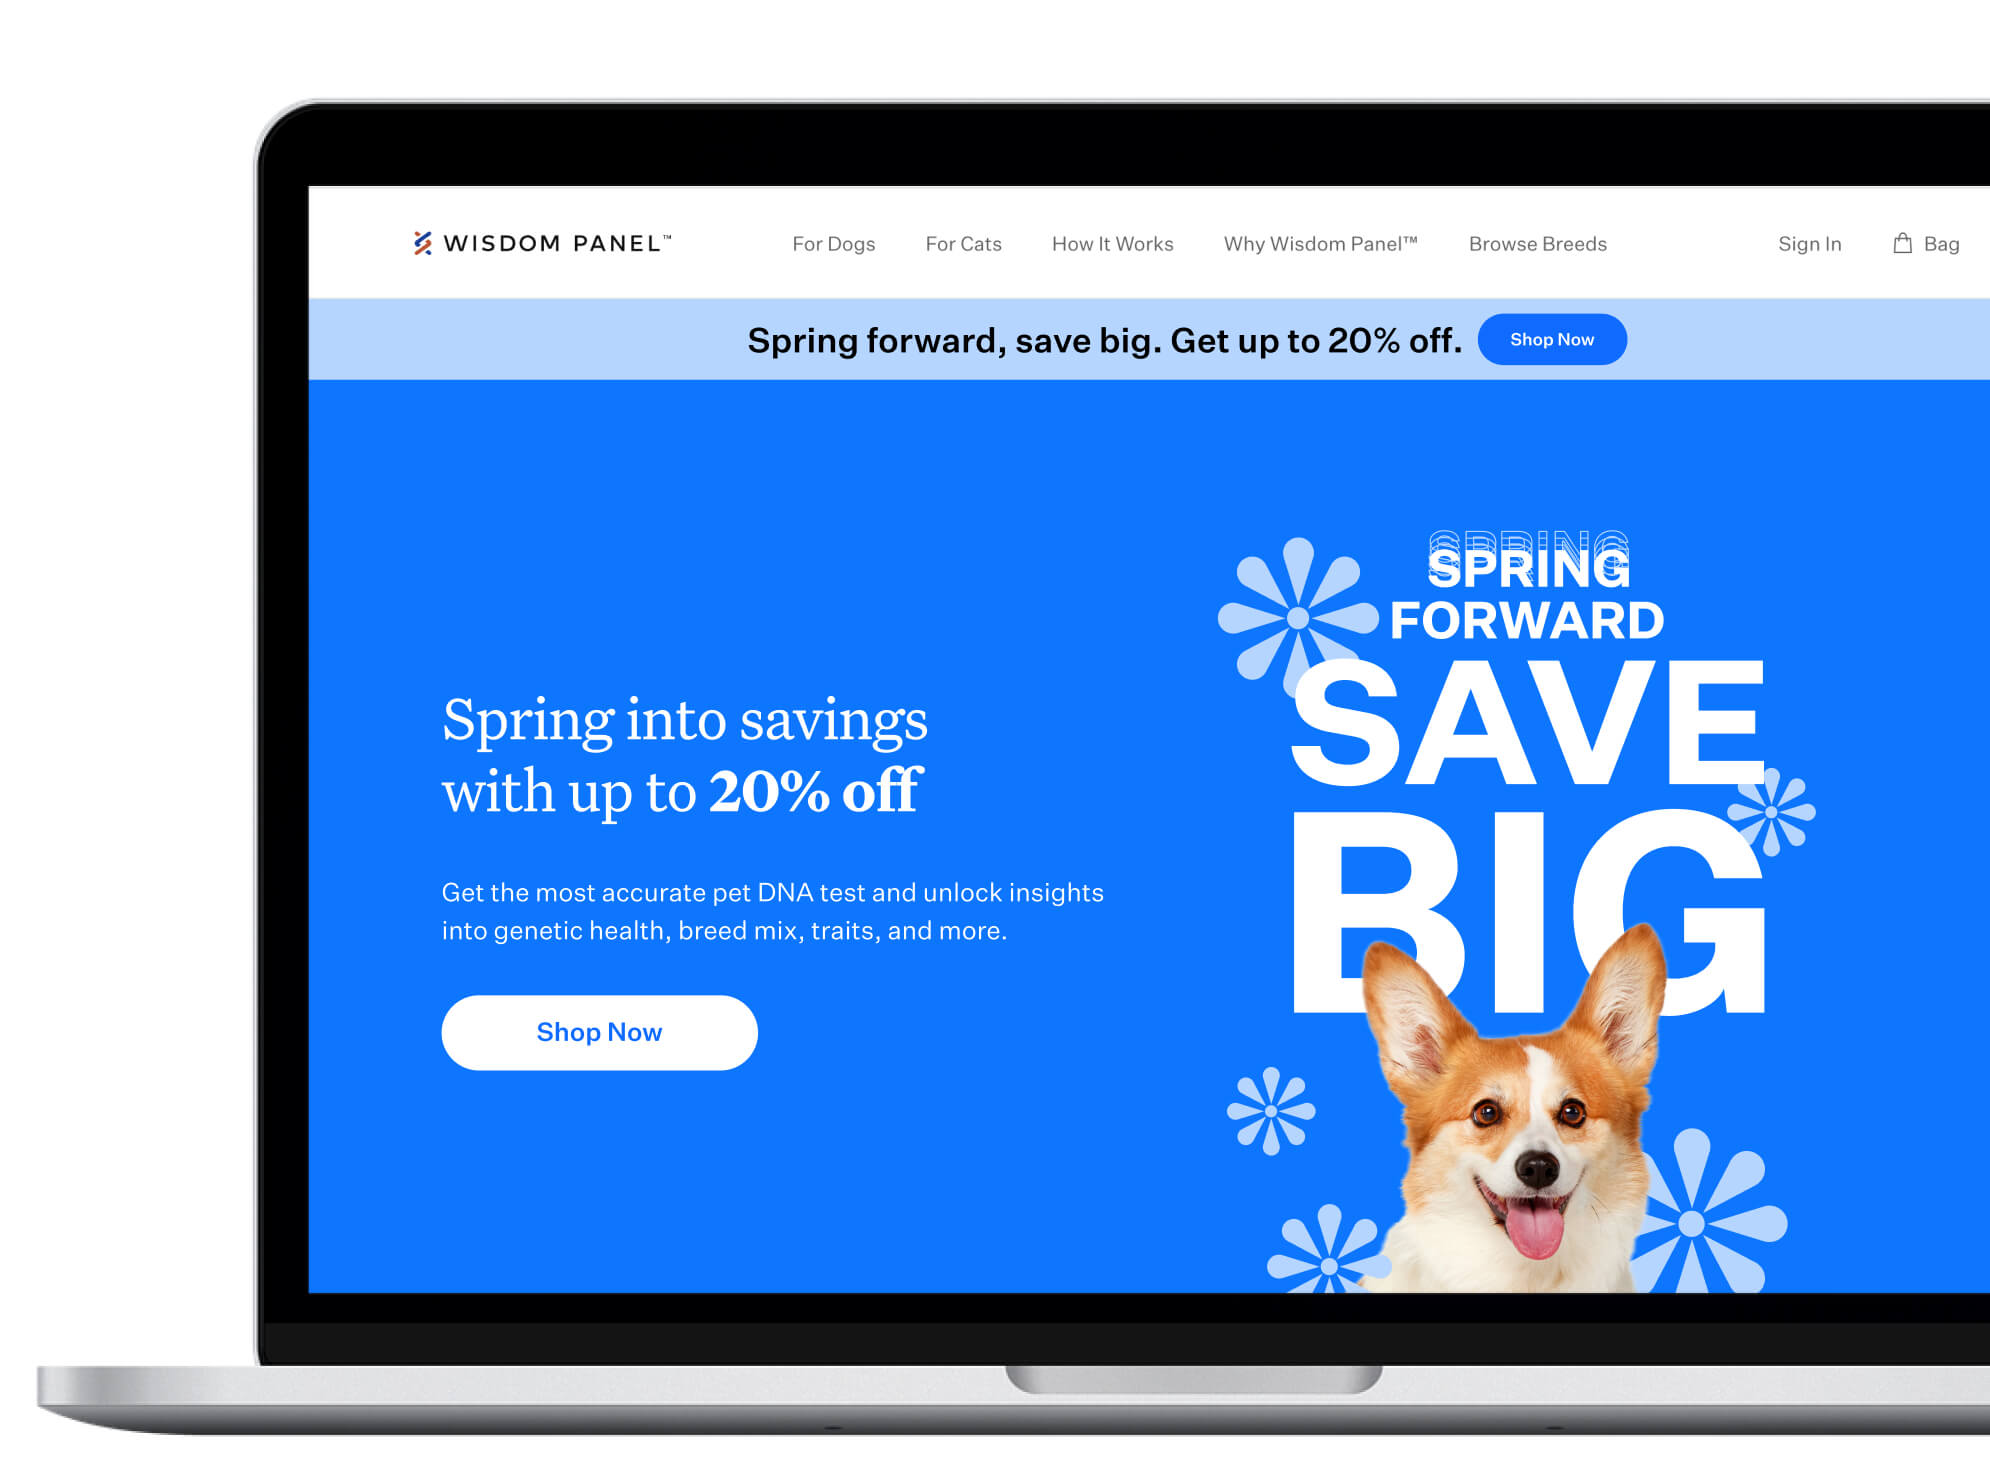 Wisdom Panel Spring marketing campaign website homepage on laptop.